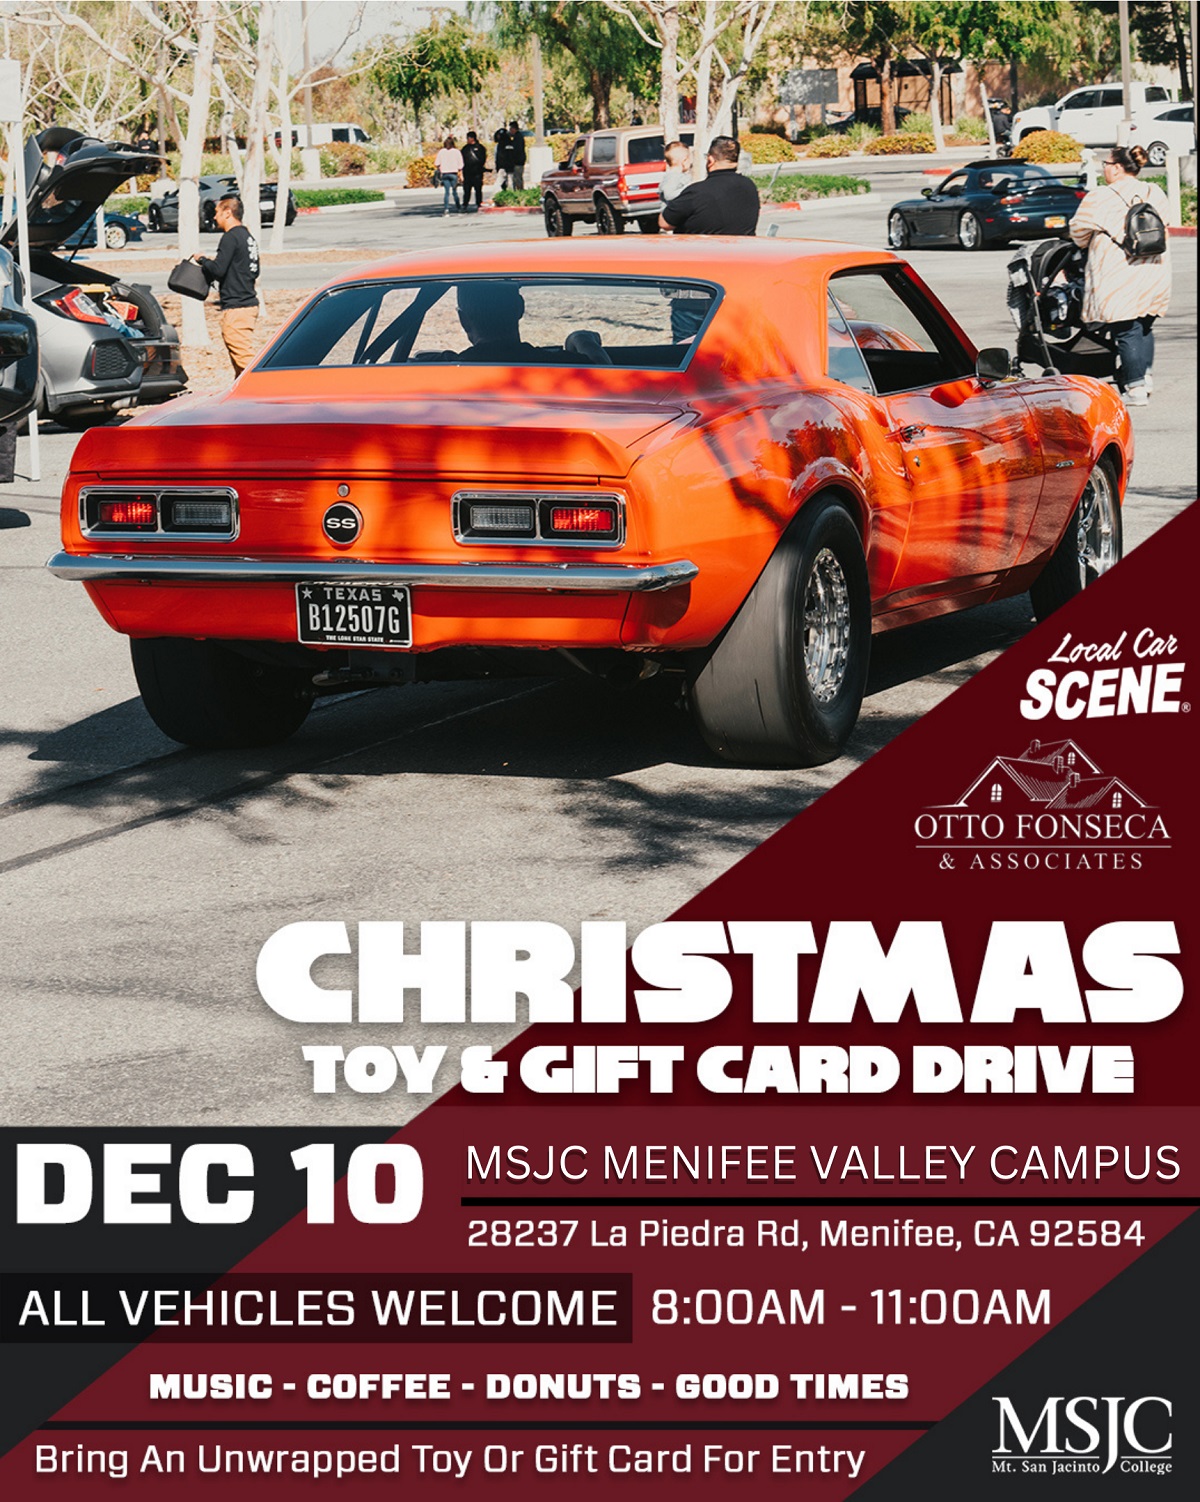 MSJC Teams Up with Organizations to Host Toy & Gift Card Drive this Saturday